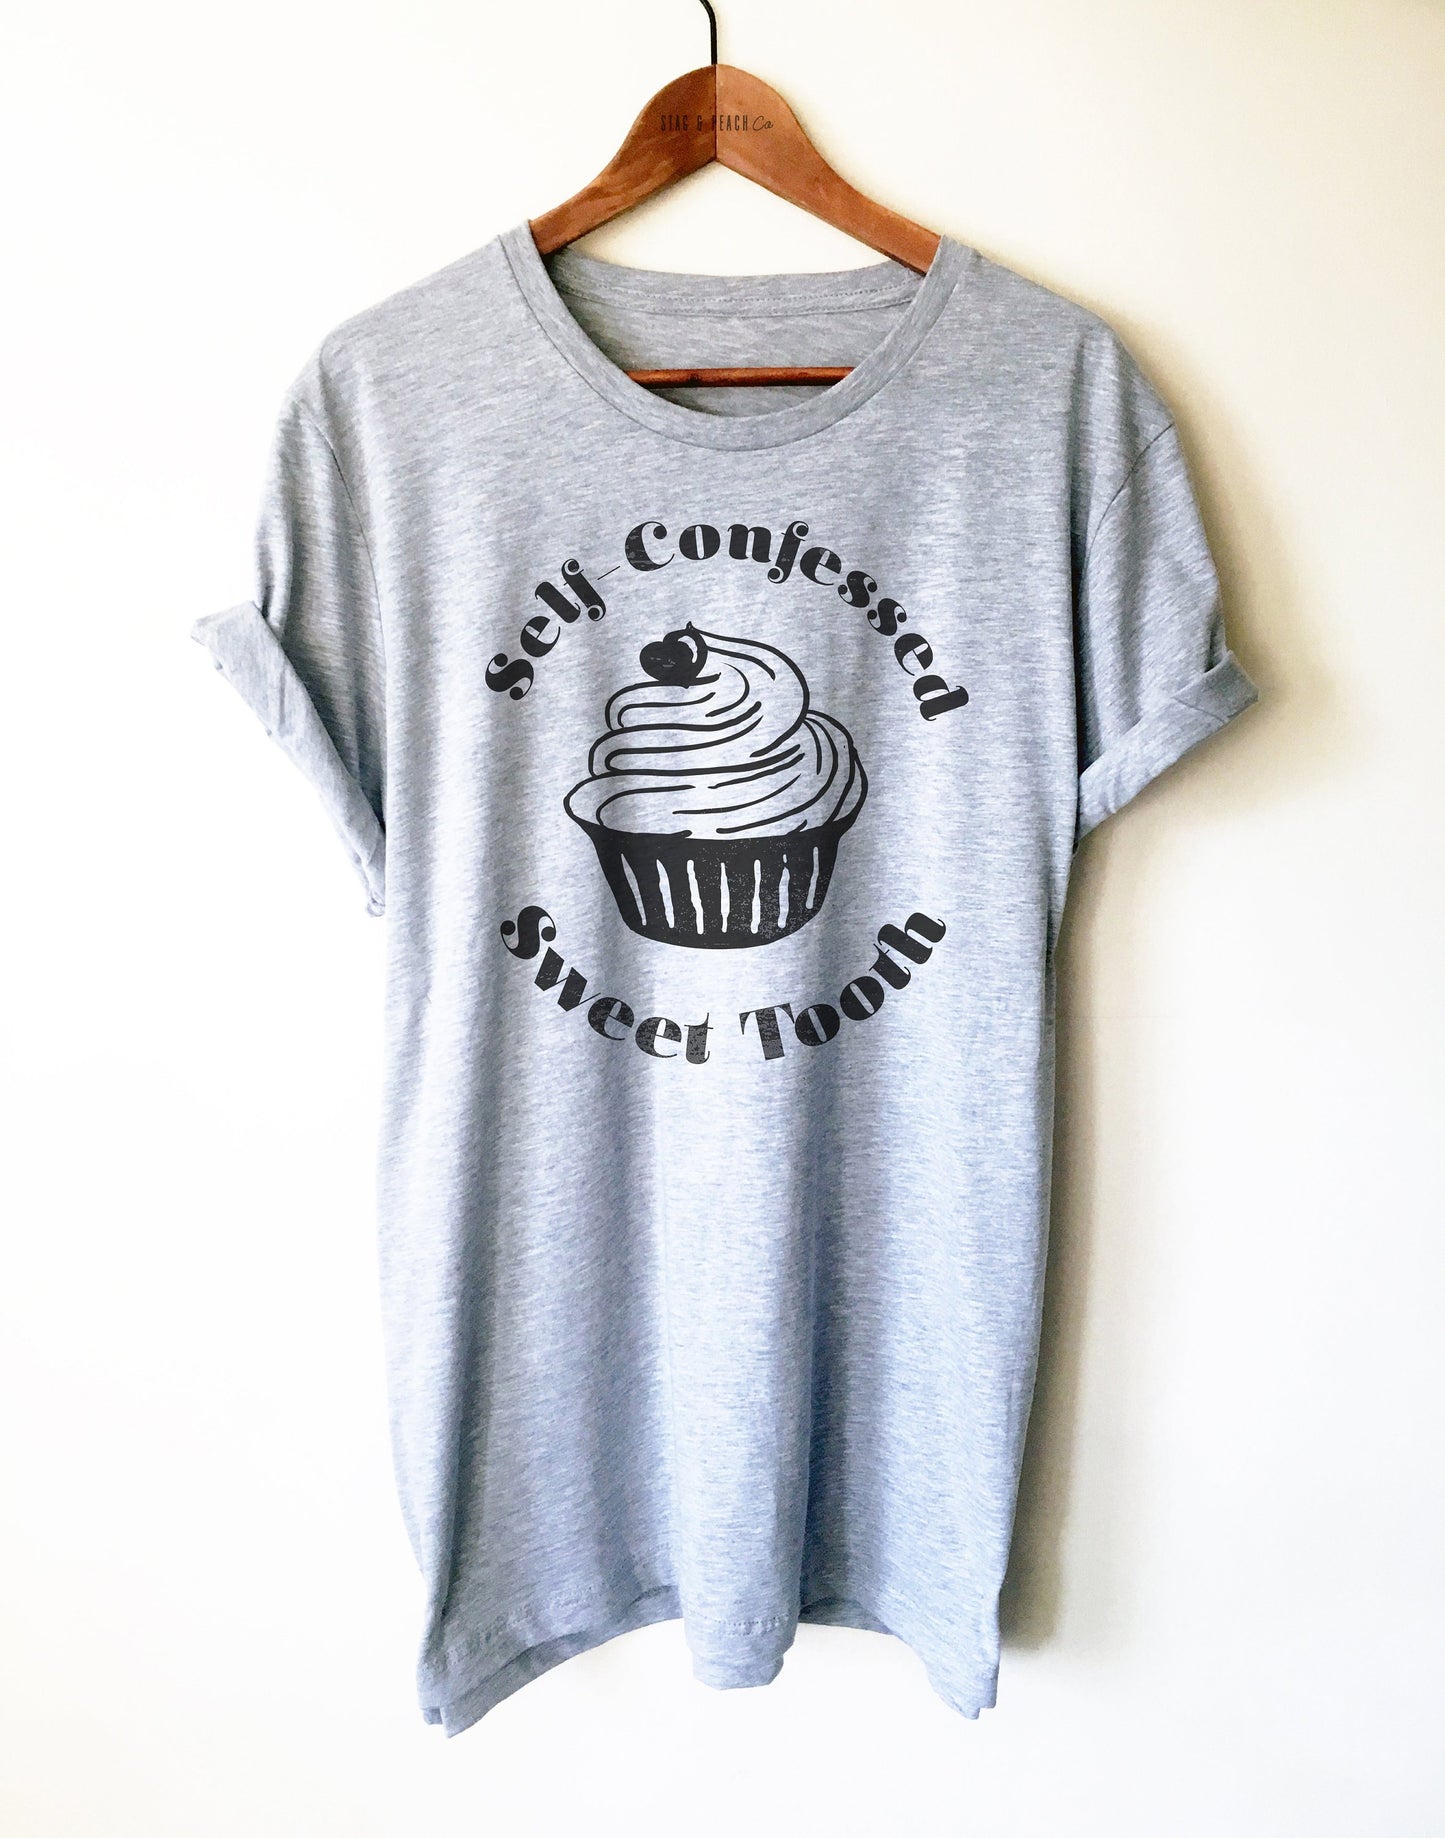 Self-Confessed Sweet Tooth Unisex Shirt - Sweet Tooth Shirt, Cupcake Birthday Party Shirt, Dessert Shirt, Sweet Lover Gift, Foodie Gift